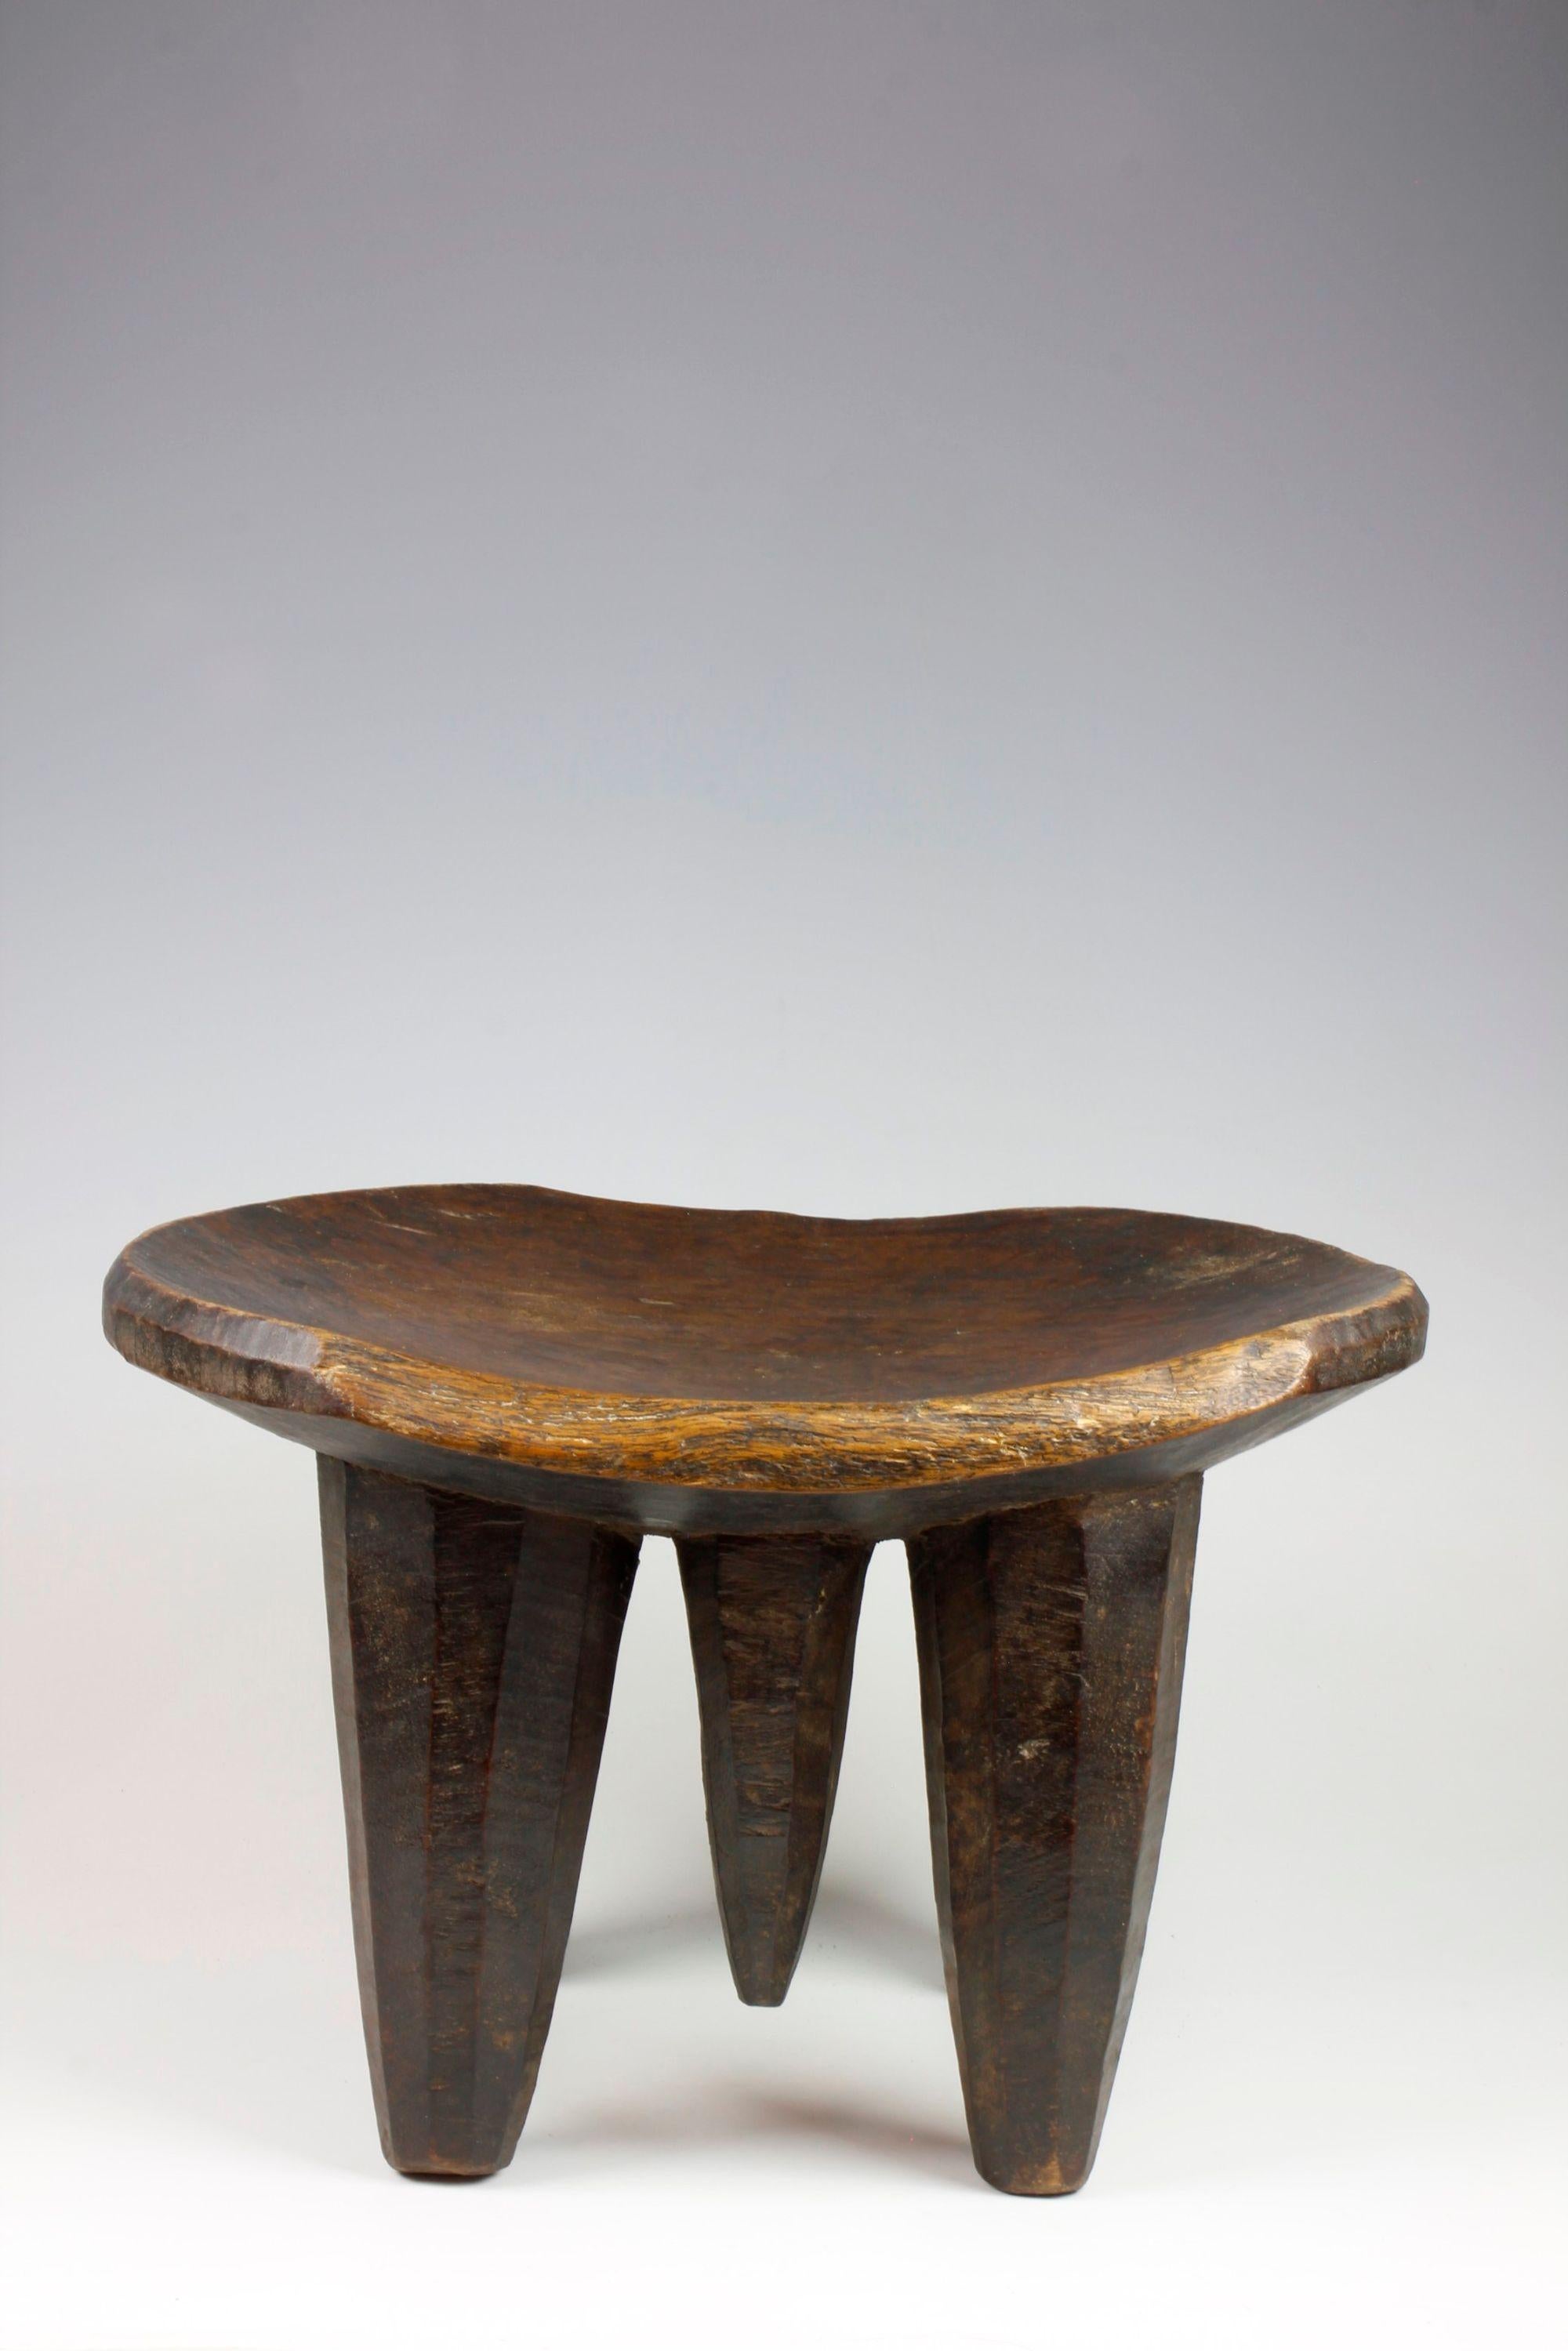 Finely carved from a single piece of wood, this stool from the Sidamo region of Ethiopia displays a wonderful sculptural quality. Four cone-shaped legs support the stool's slightly-curved seat and, located between each front and rear leg, is an